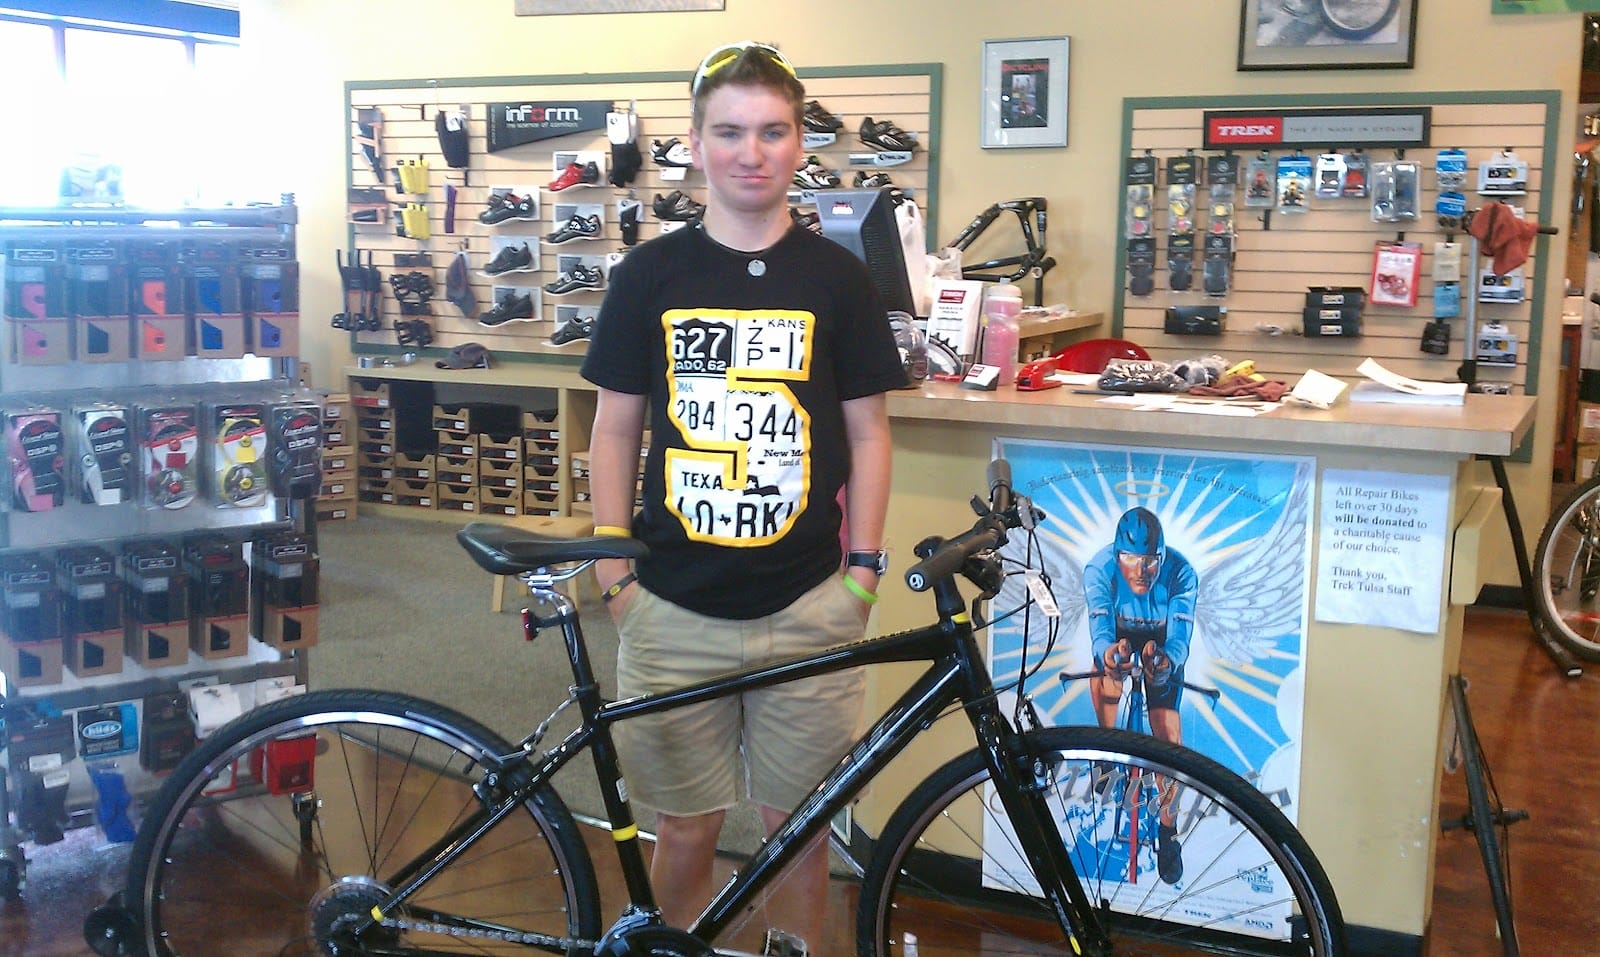 14 Year Old Cyclist Aims to Raise $20,000 for Livestrong